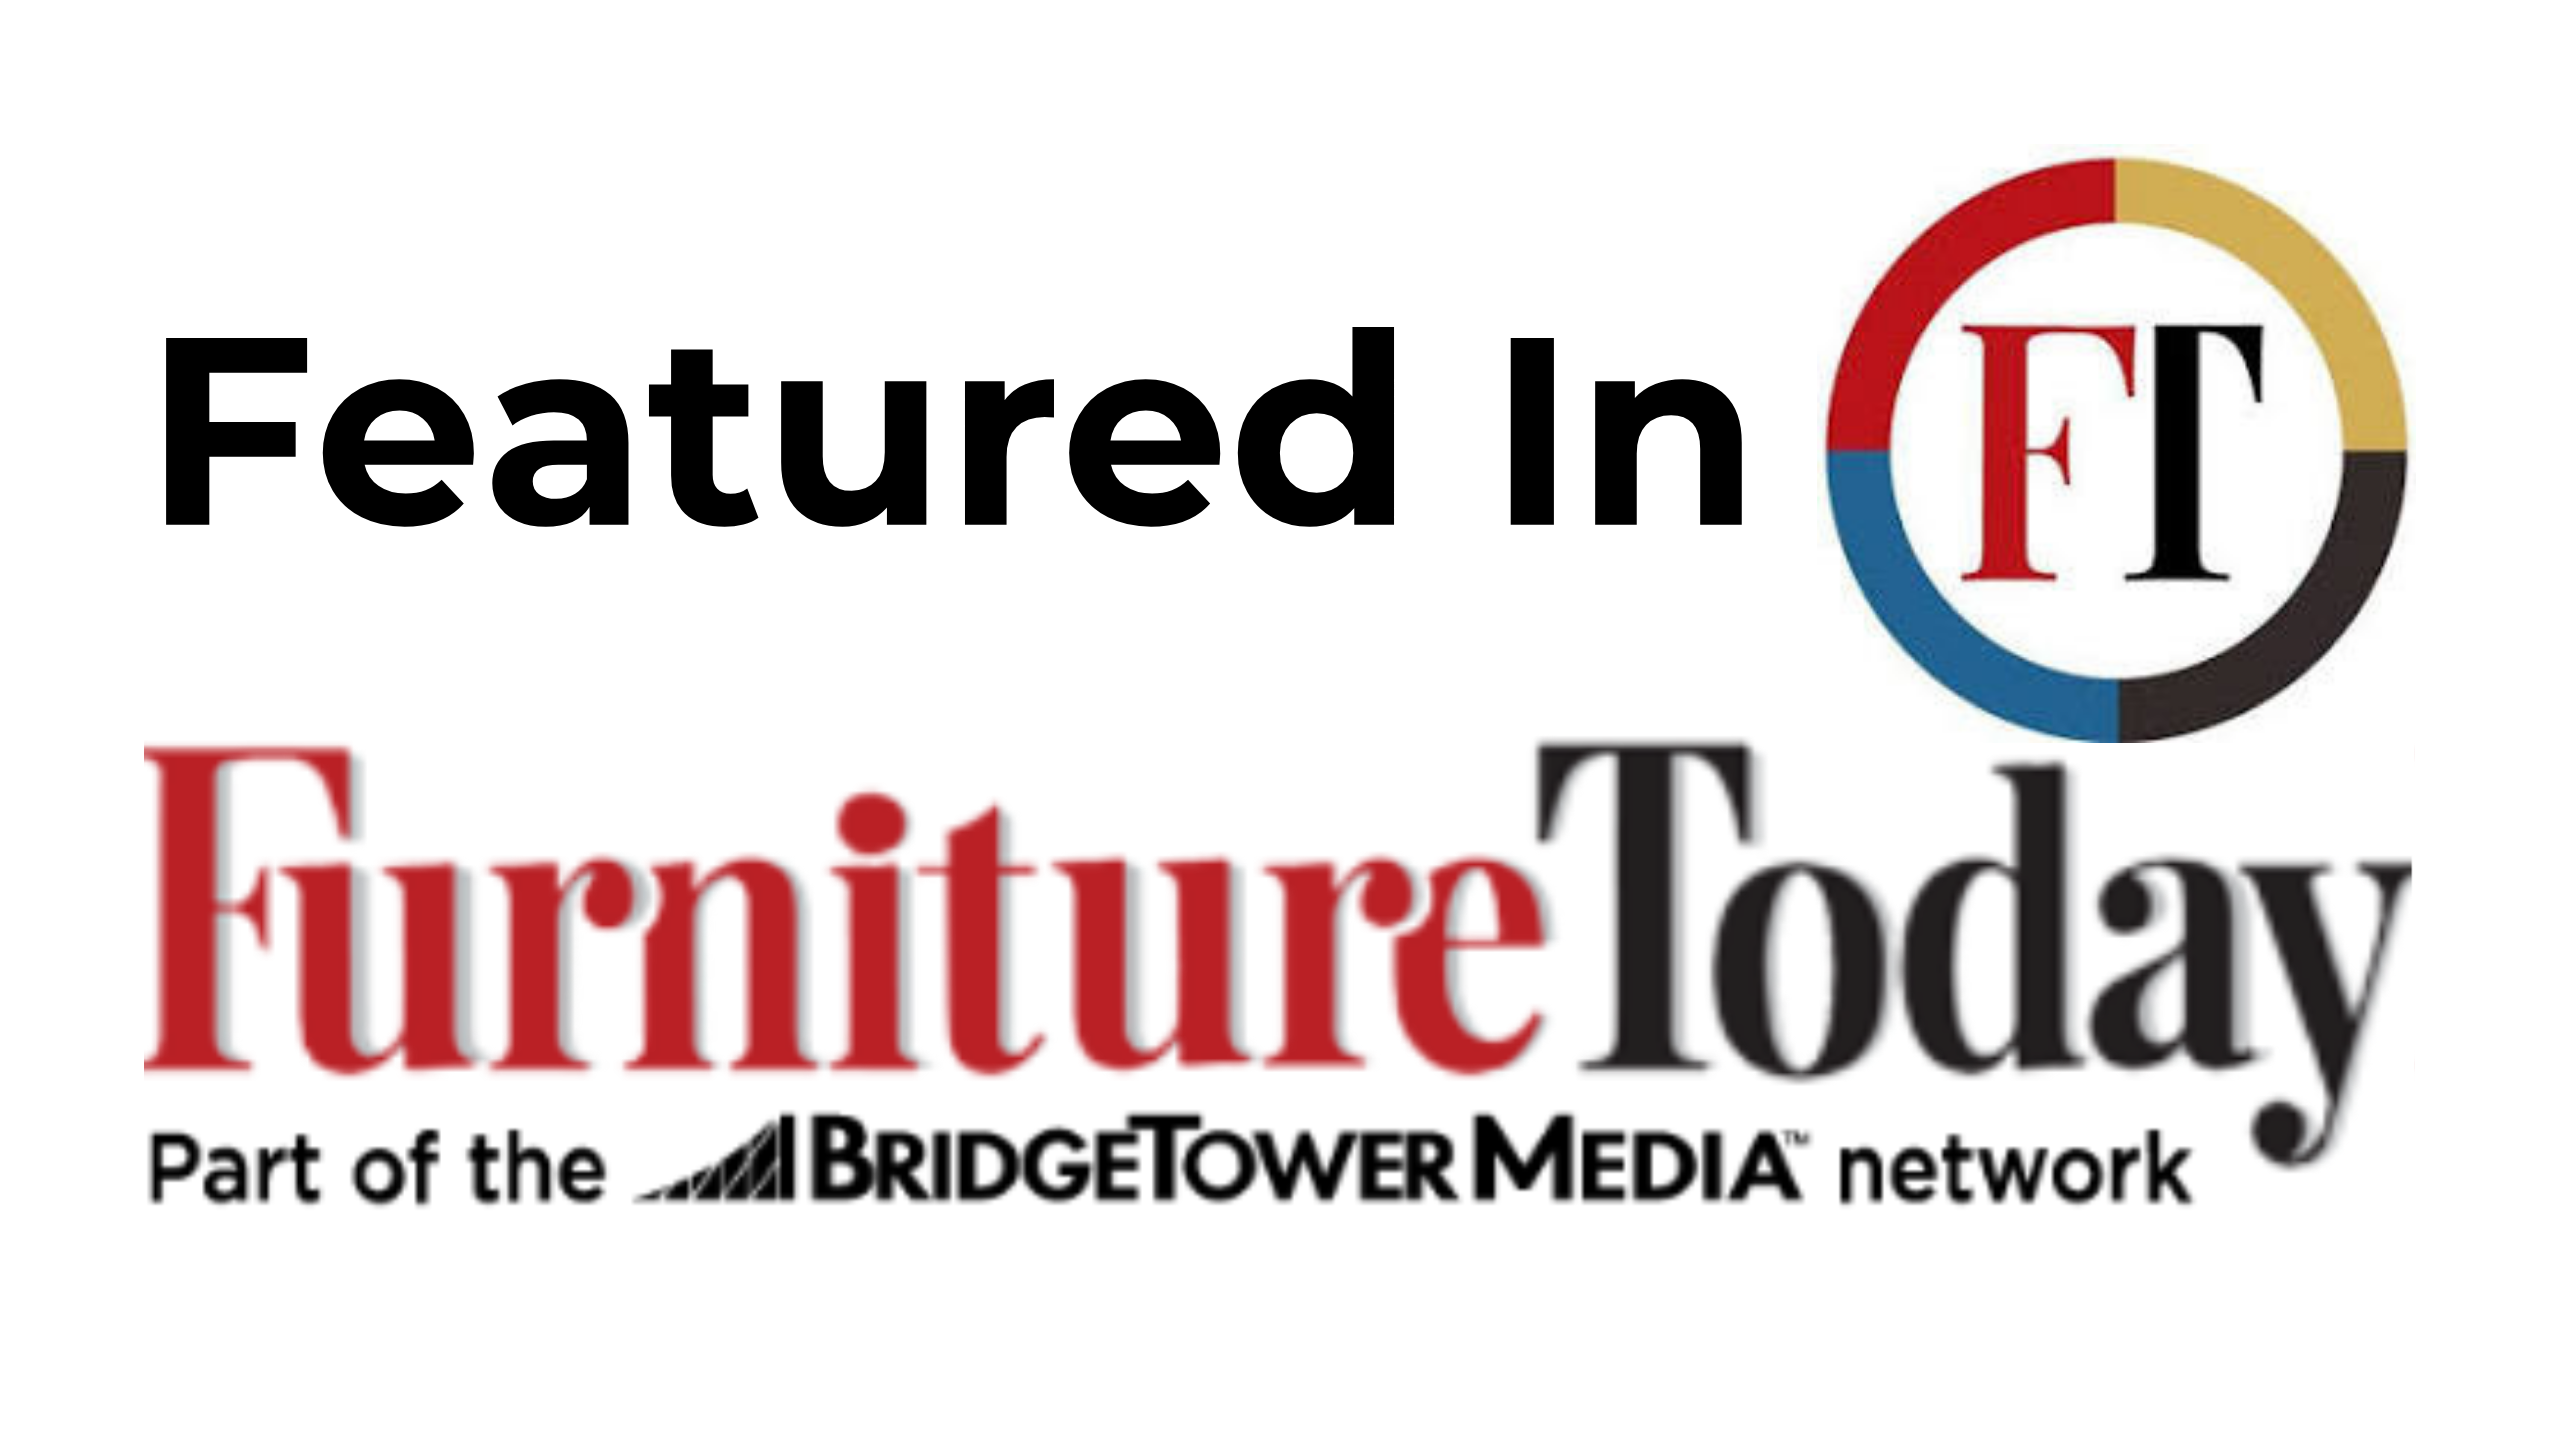 Image showing the logo for Furniture Today, with the text "Featured In FT" at the top. The Furniture Today logo includes the text "Part of the BRIDGETOWER MEDIA network" beneath it. The "T" in Furniture Today is stylized within a color circle.